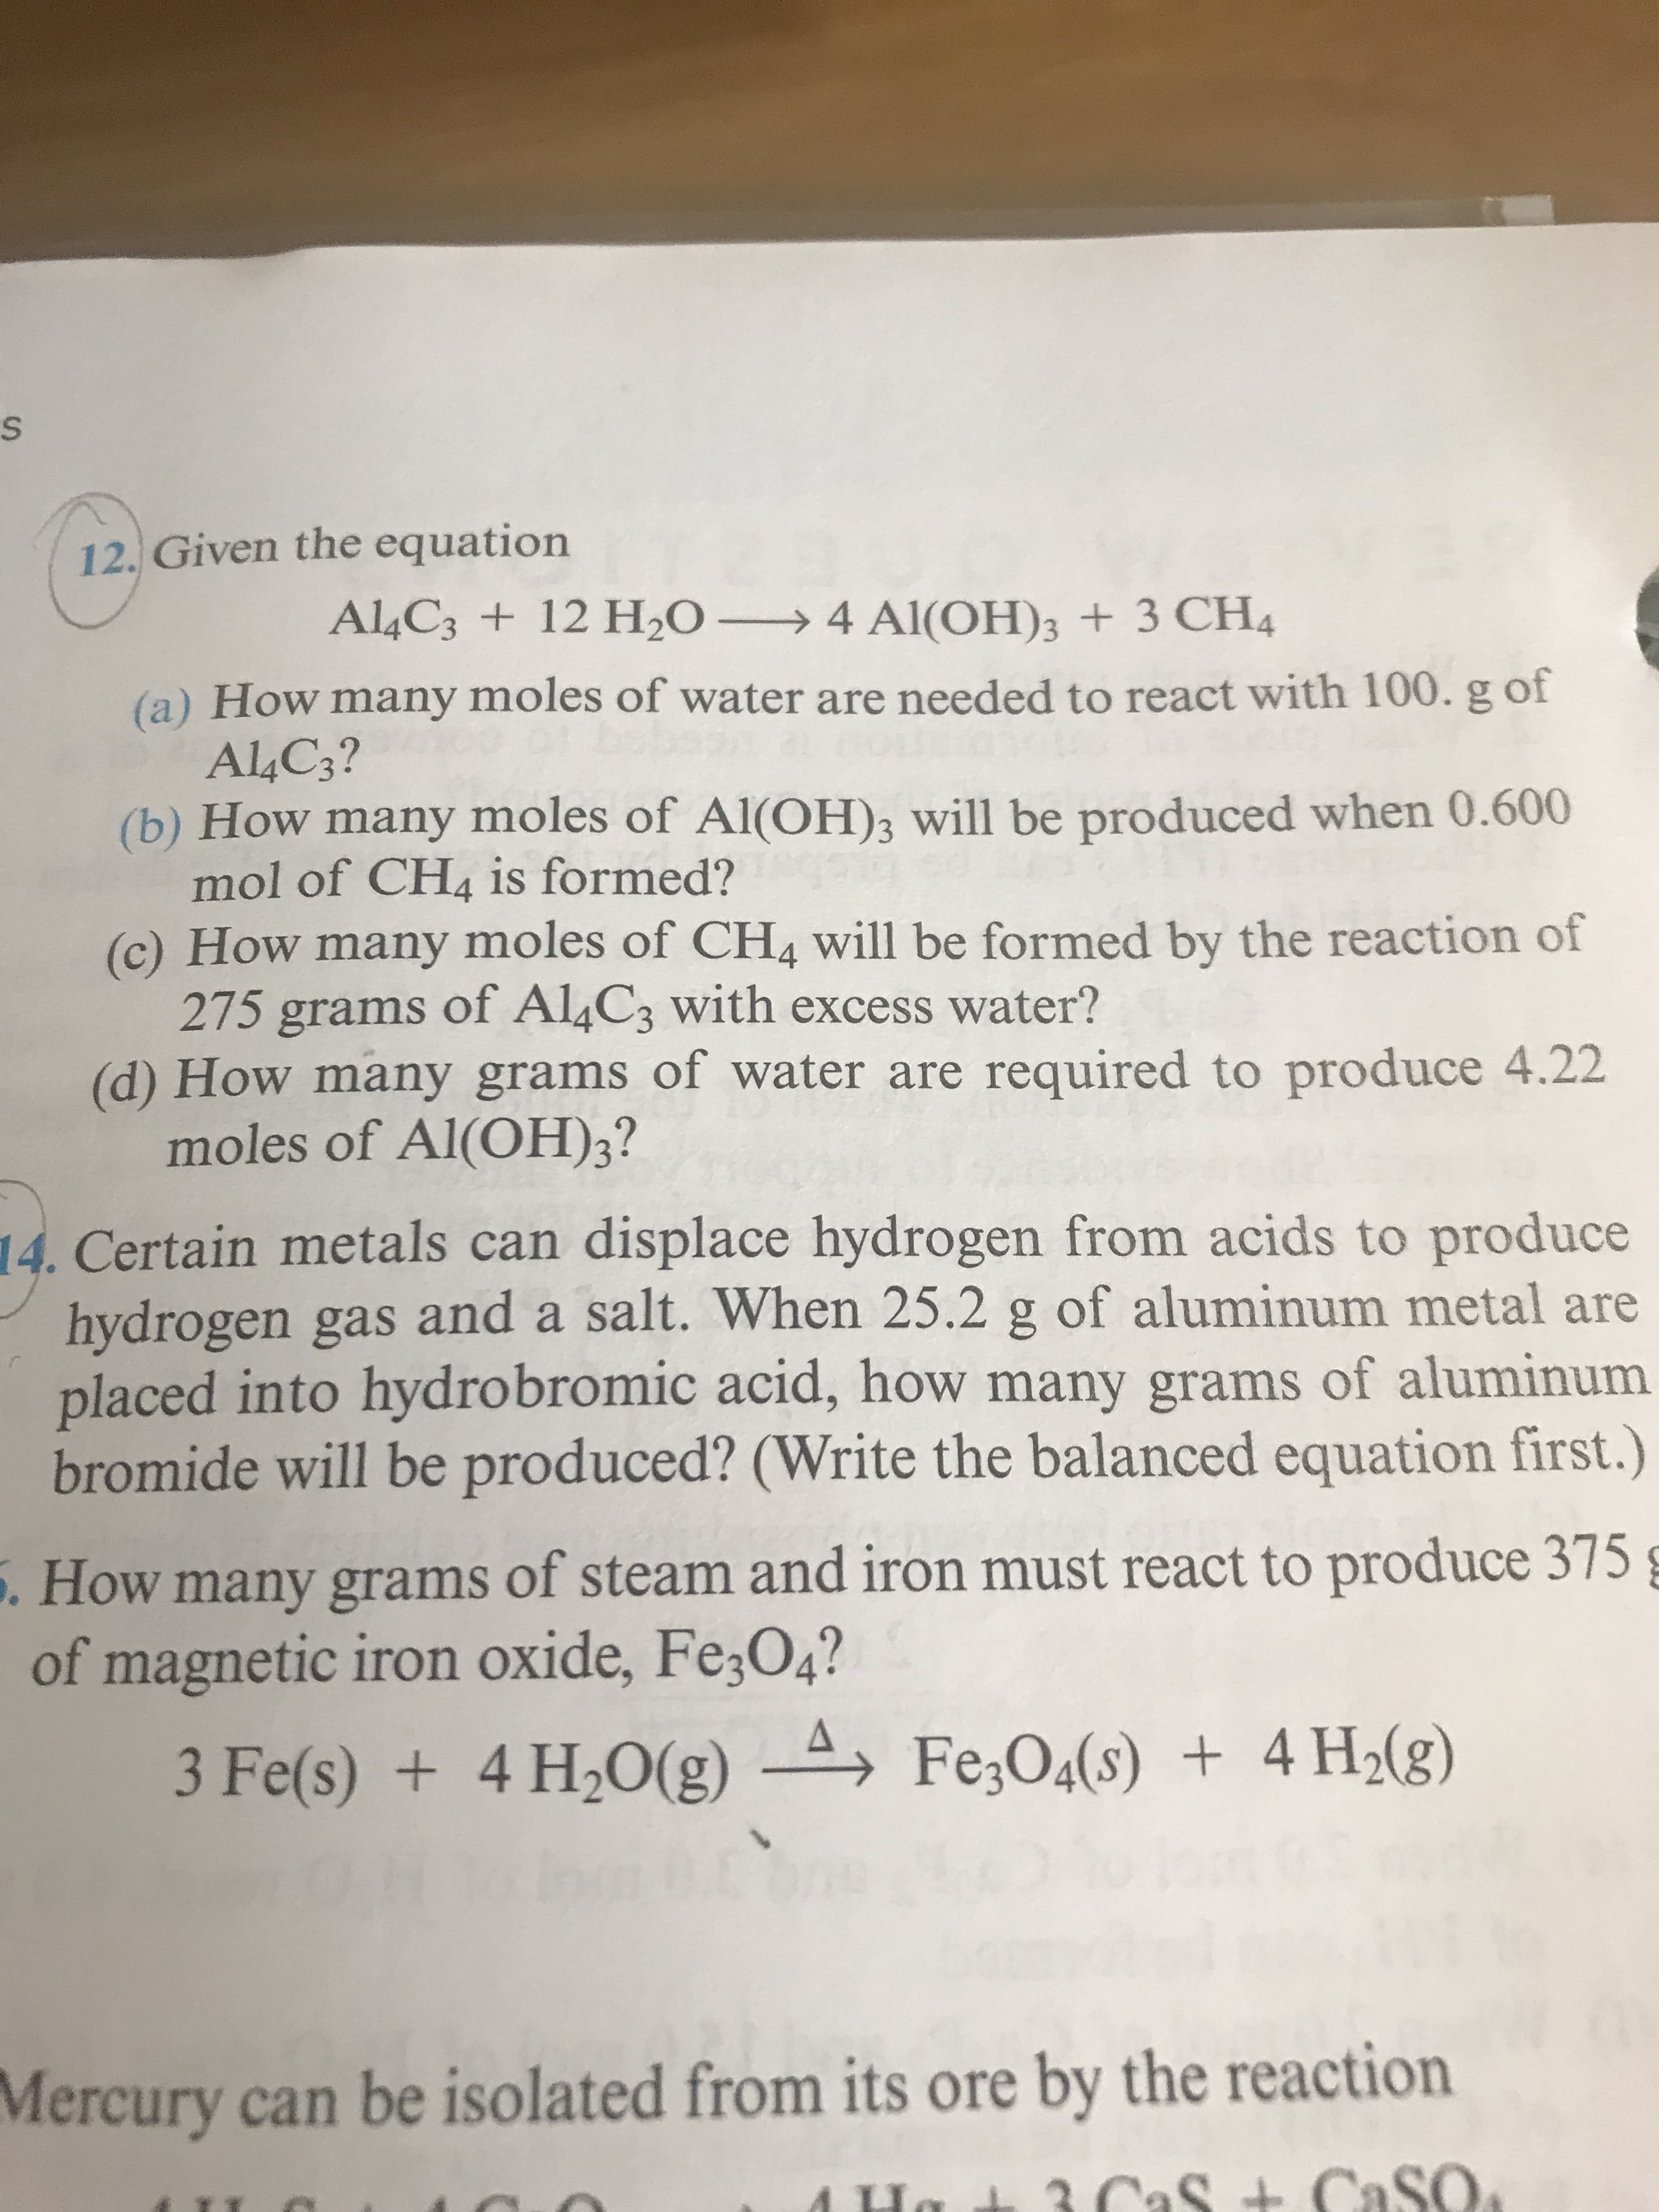 12, Given the equation
Al,C3 + 12 H2O-→ 4 Al(OH)3 + 3 CH,
(a) How many moles of water are needed to react with 100. g of
(b) How many moles of Al(OH)s will be produced when 0.600
(c) How many moles of CH4 will be formed by the reaction of
(d) How many grams of water are required to produce 4.22
A4C3?
mol of CH4 is formed?
275 grams of Al4C3 with excess water?
moles of Al(OH)3?
Certain metals can displace hydrogen from acids to produce
hydrogen gas and a salt. When 25.2 g of aluminum metal are
placed into hydrobromic acid, how many grams of aluminum
bromide will be produced? (Write the balanced equation first.)
14.
.
How many grams of steam and iron must react to produce 375
of magnetic iron oxide, Fe,04?
Mercury can be isolated from its ore by the reaction
